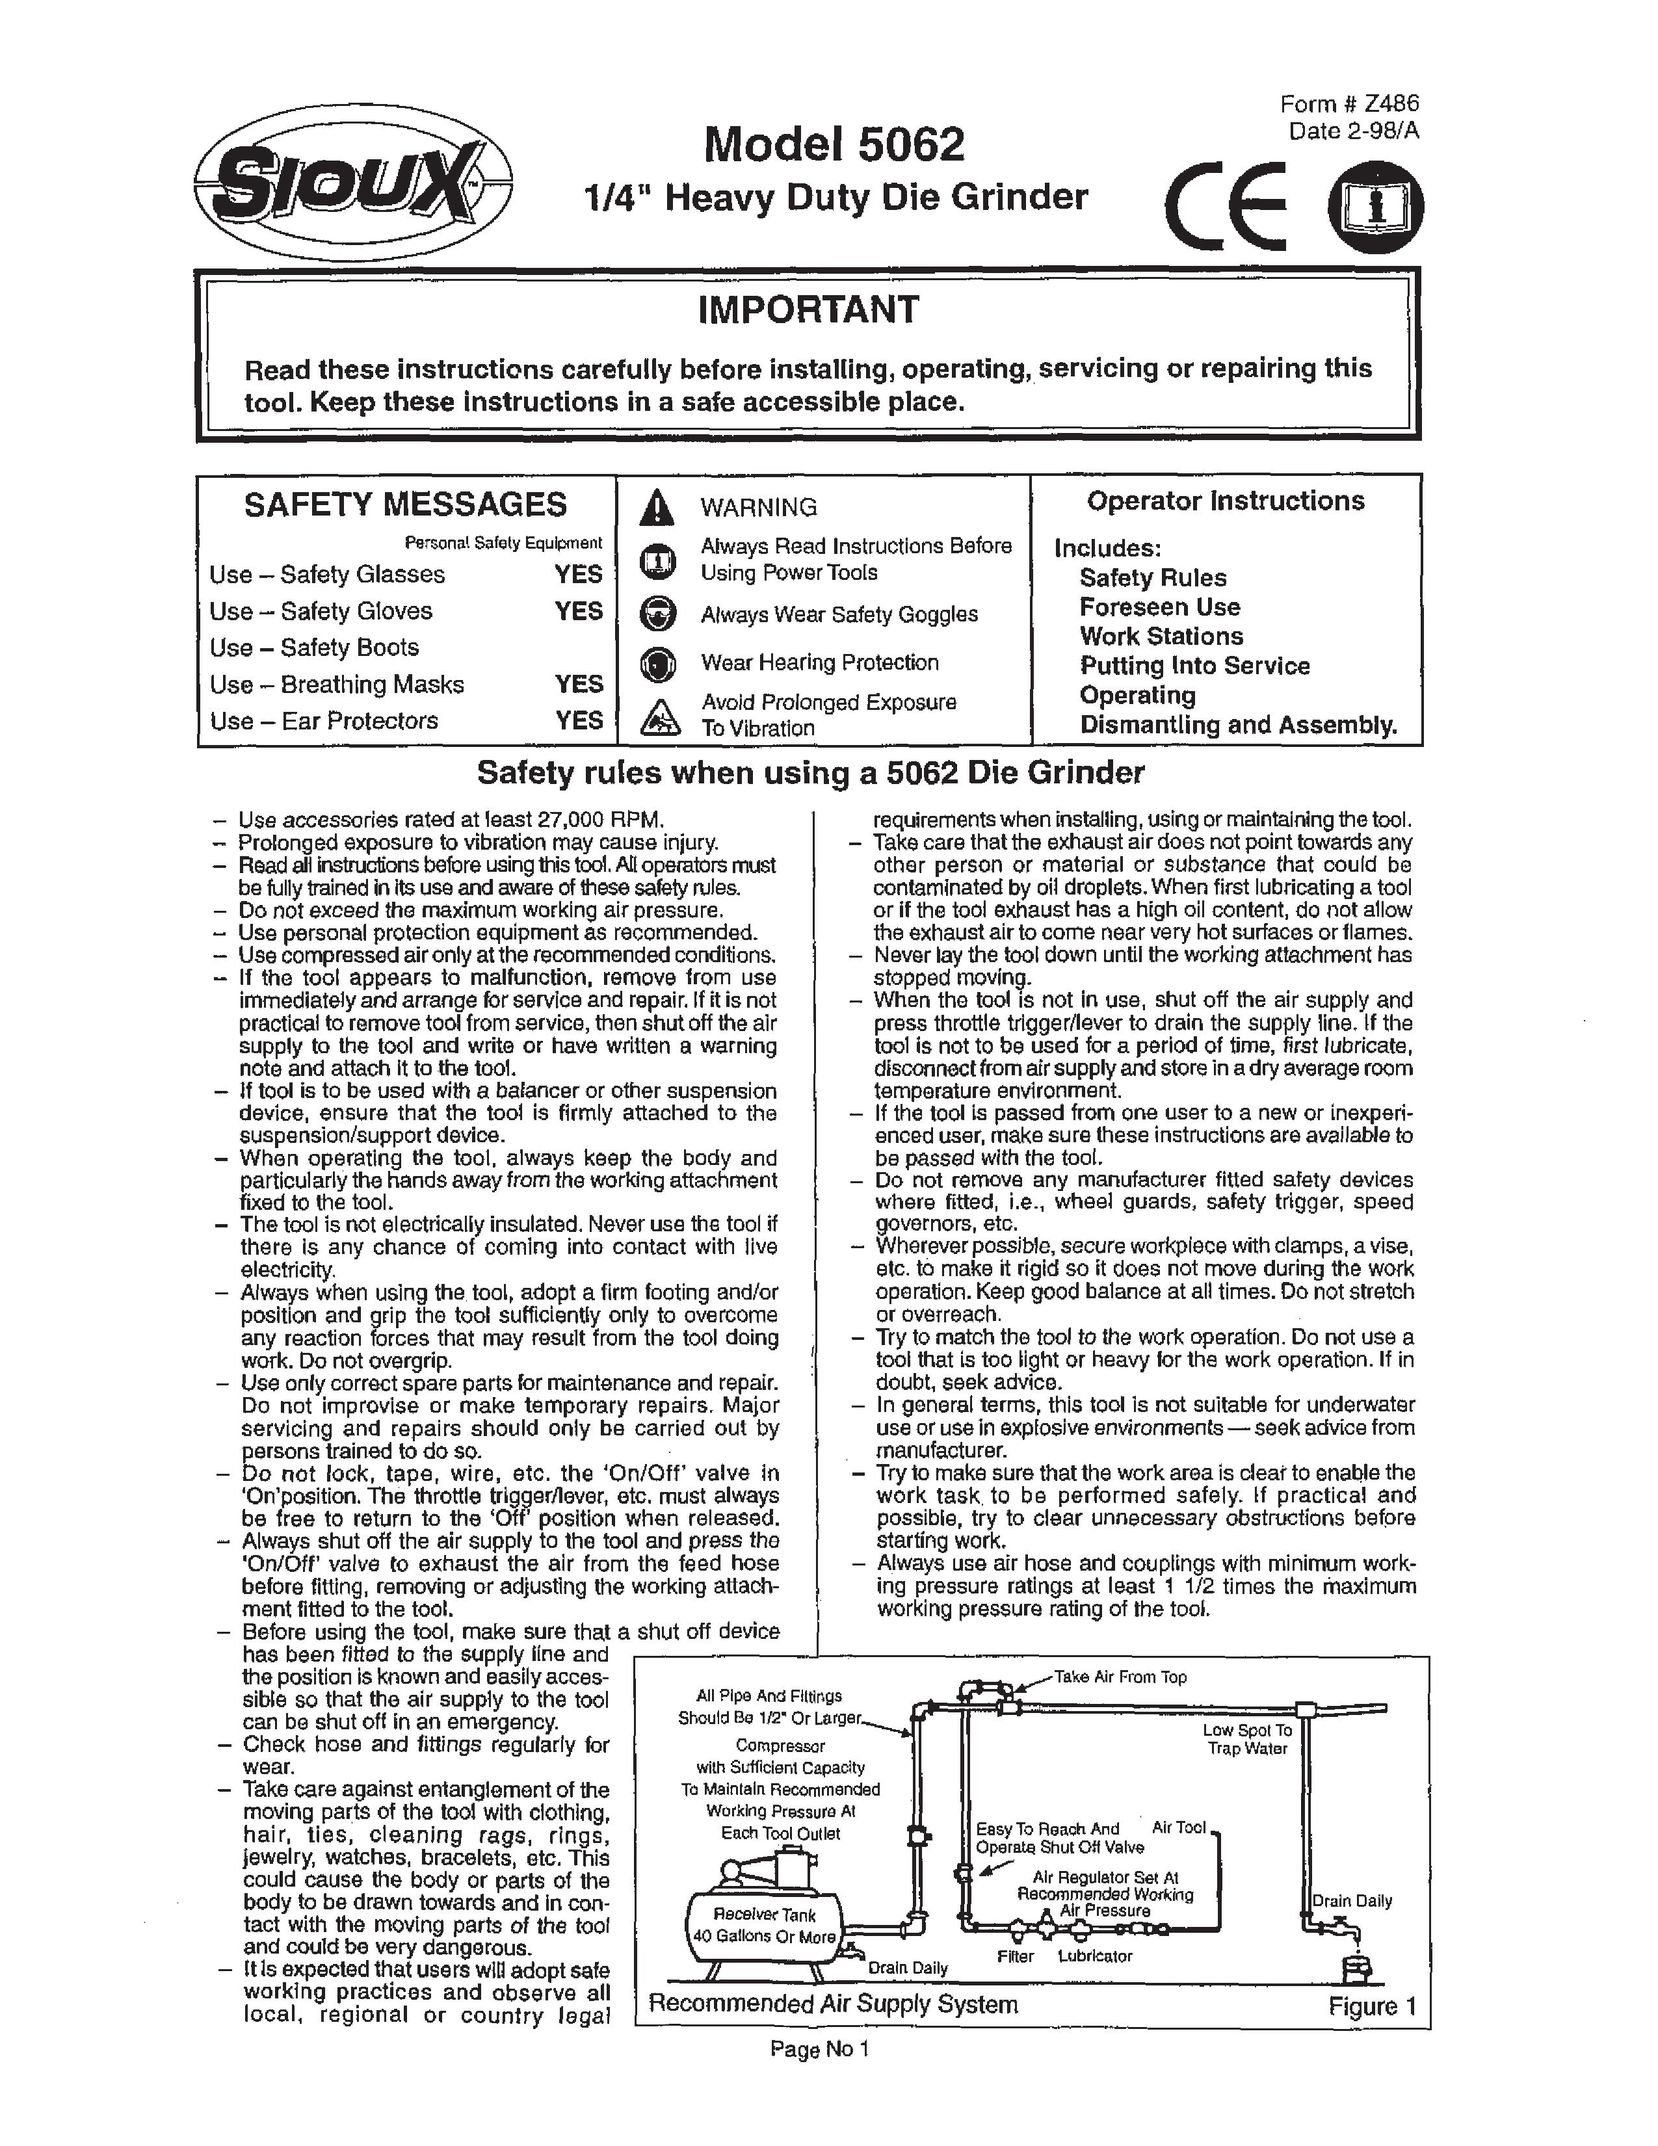 Sioux Tools 5062 Grinder User Manual